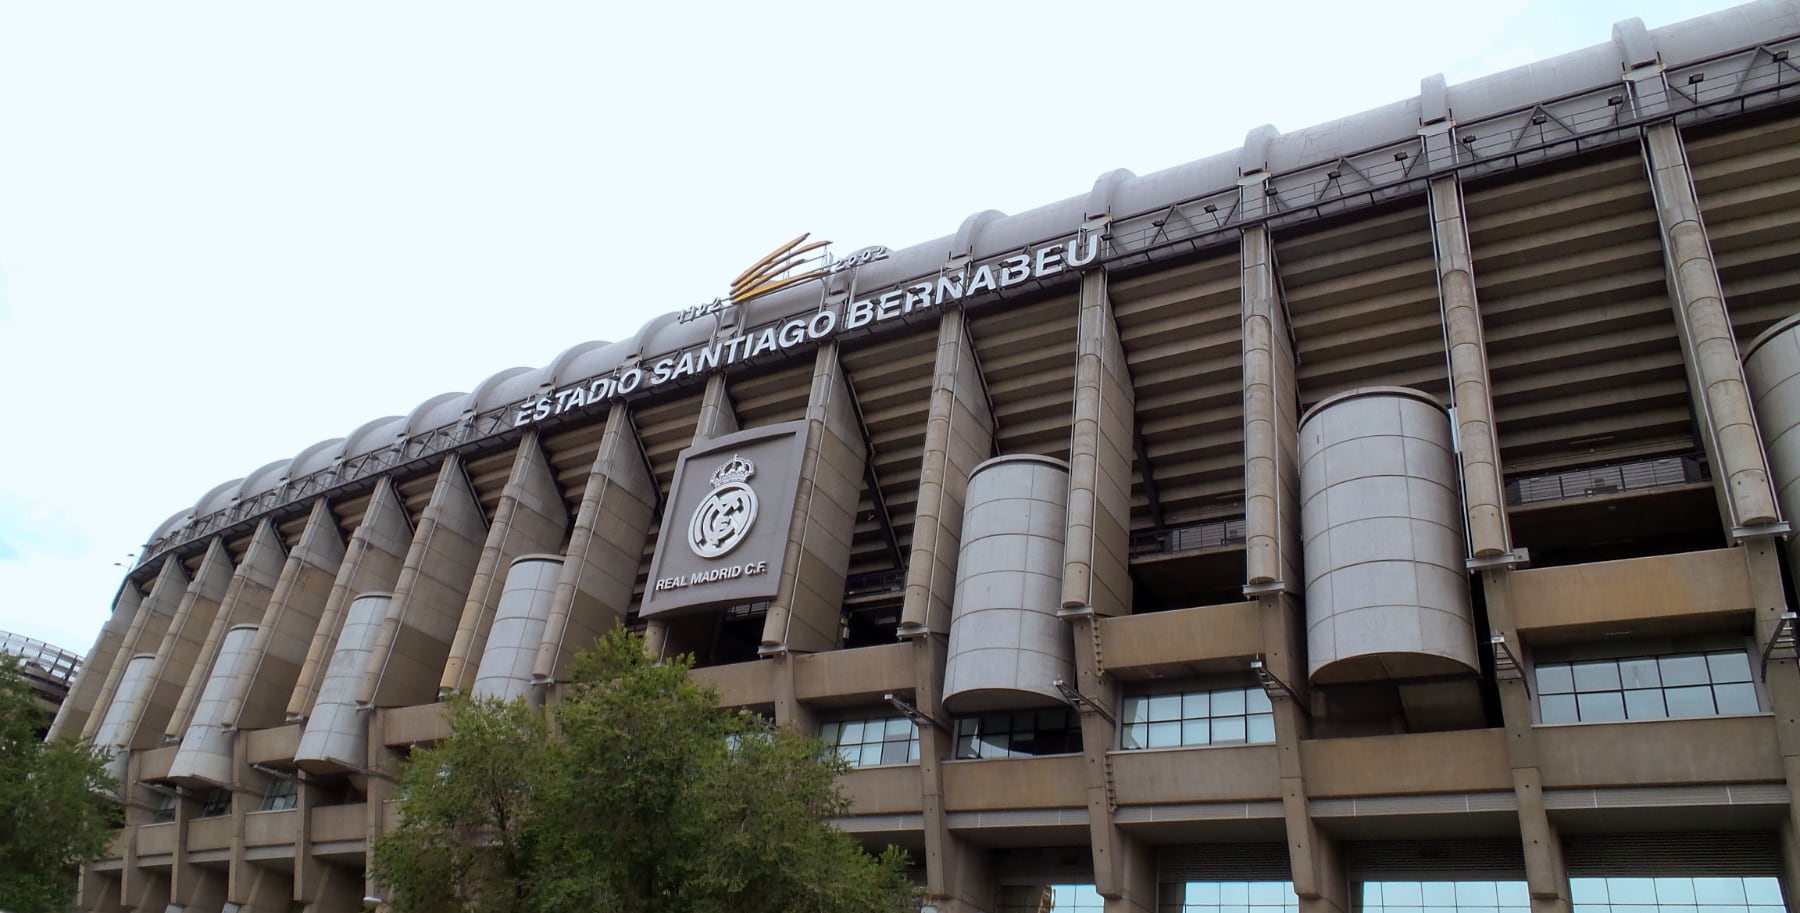 Home of Real Madrid CF